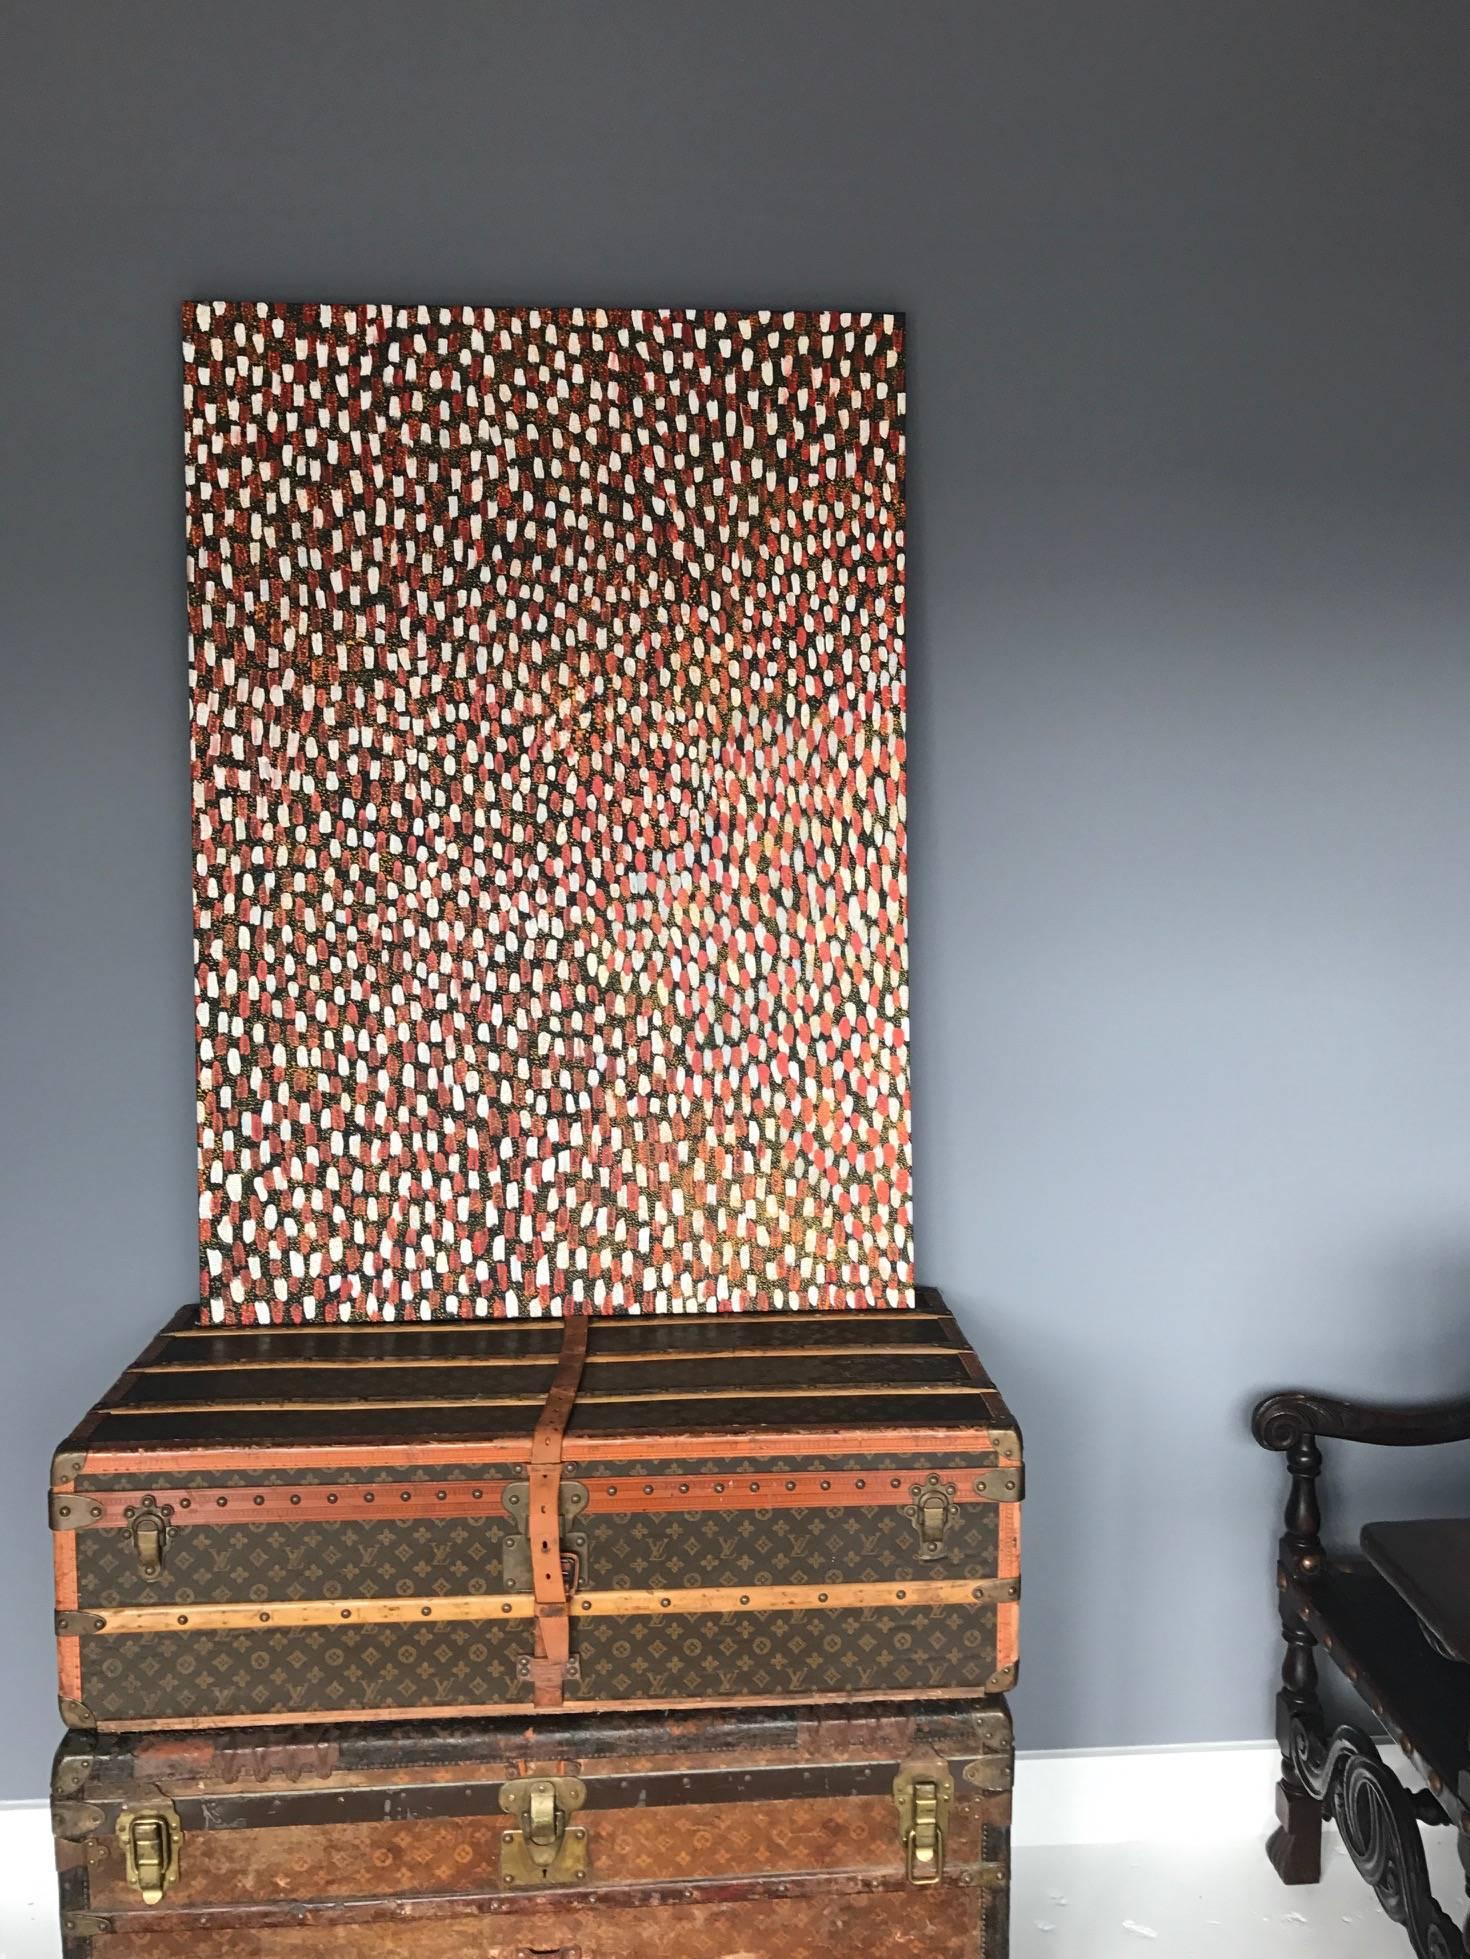 A lovely Aboriginal contemporary painting by Abie Loy depicting Medicine leaves in Dreamtime. The alternating burnt orange and white dots contrast each other on the black background, a haze of orange mini-dots further providing a shifting visual